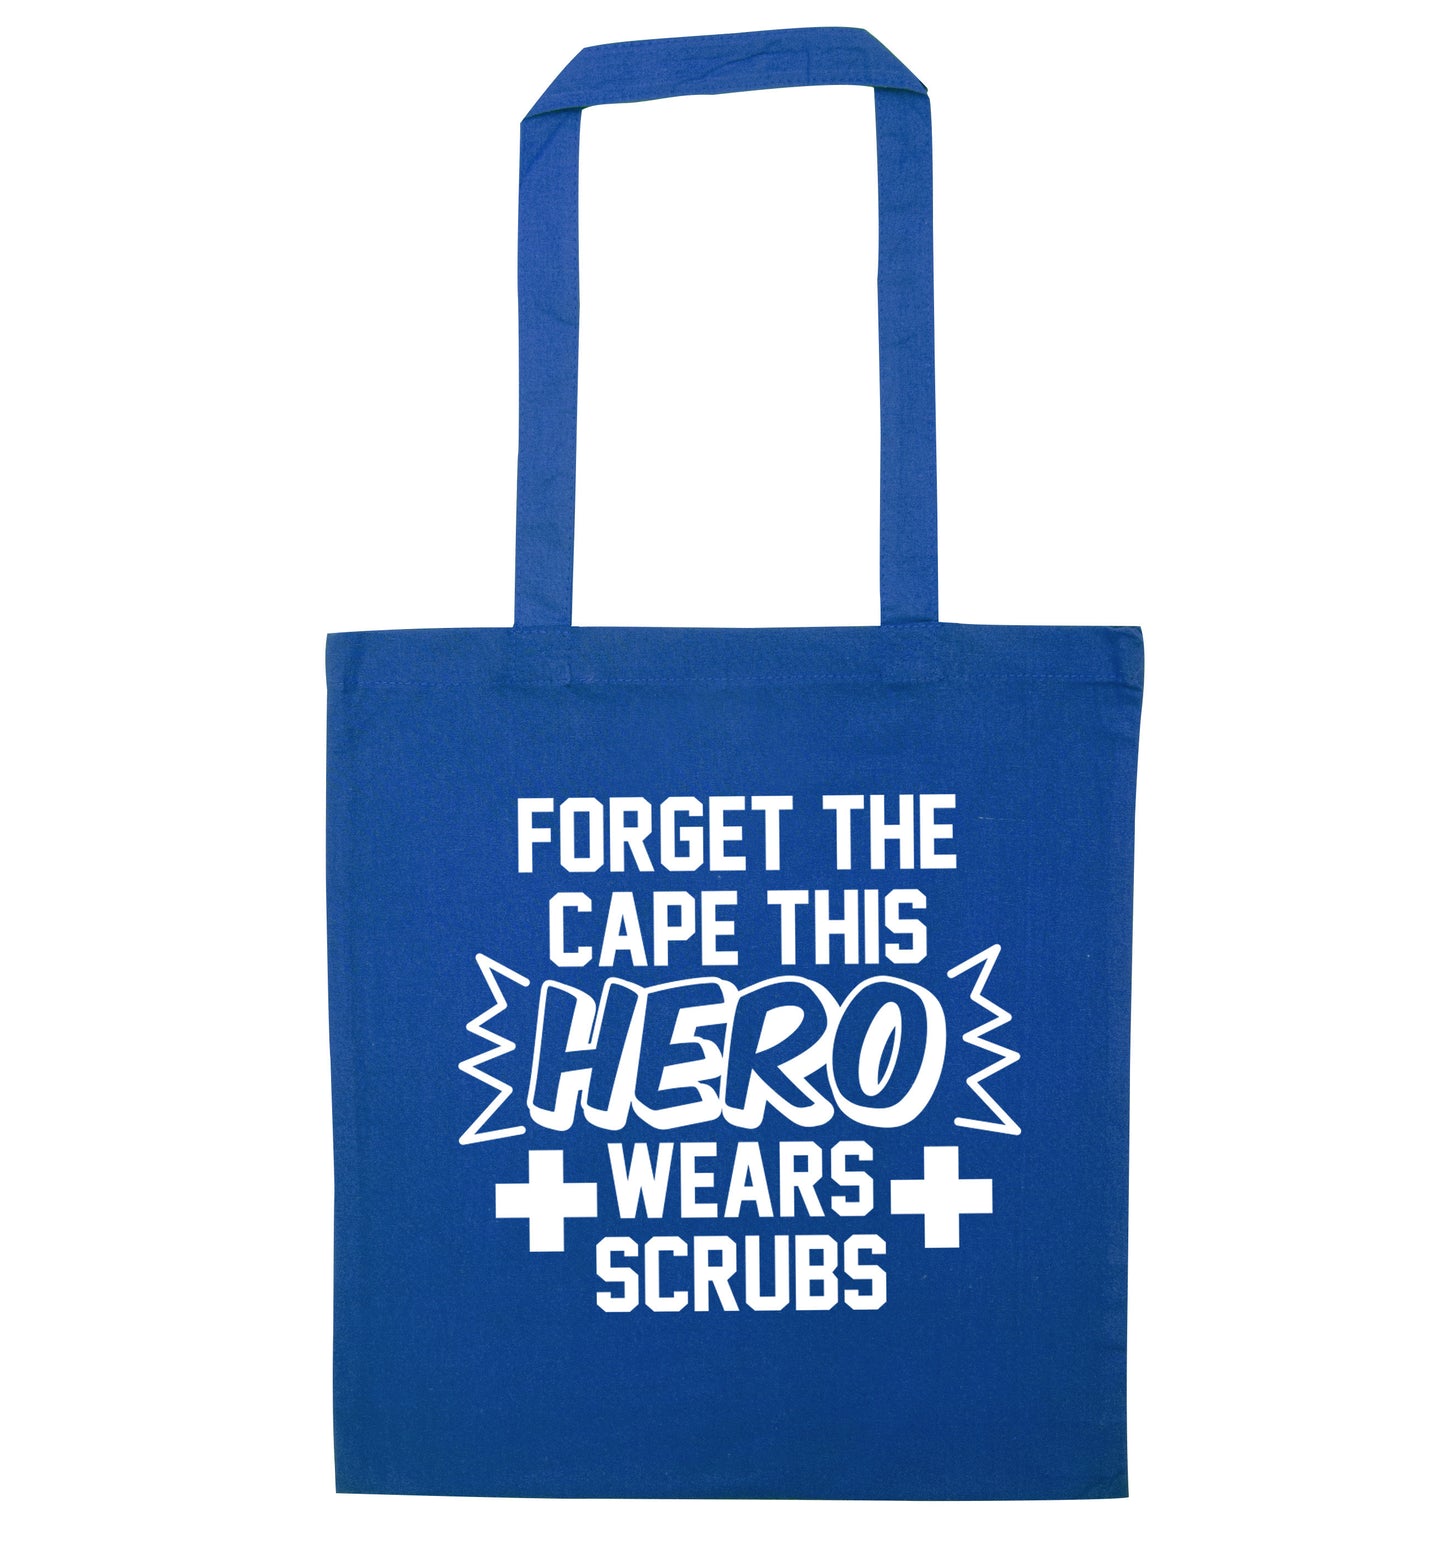 Forget the cape this hero wears scrubs blue tote bag